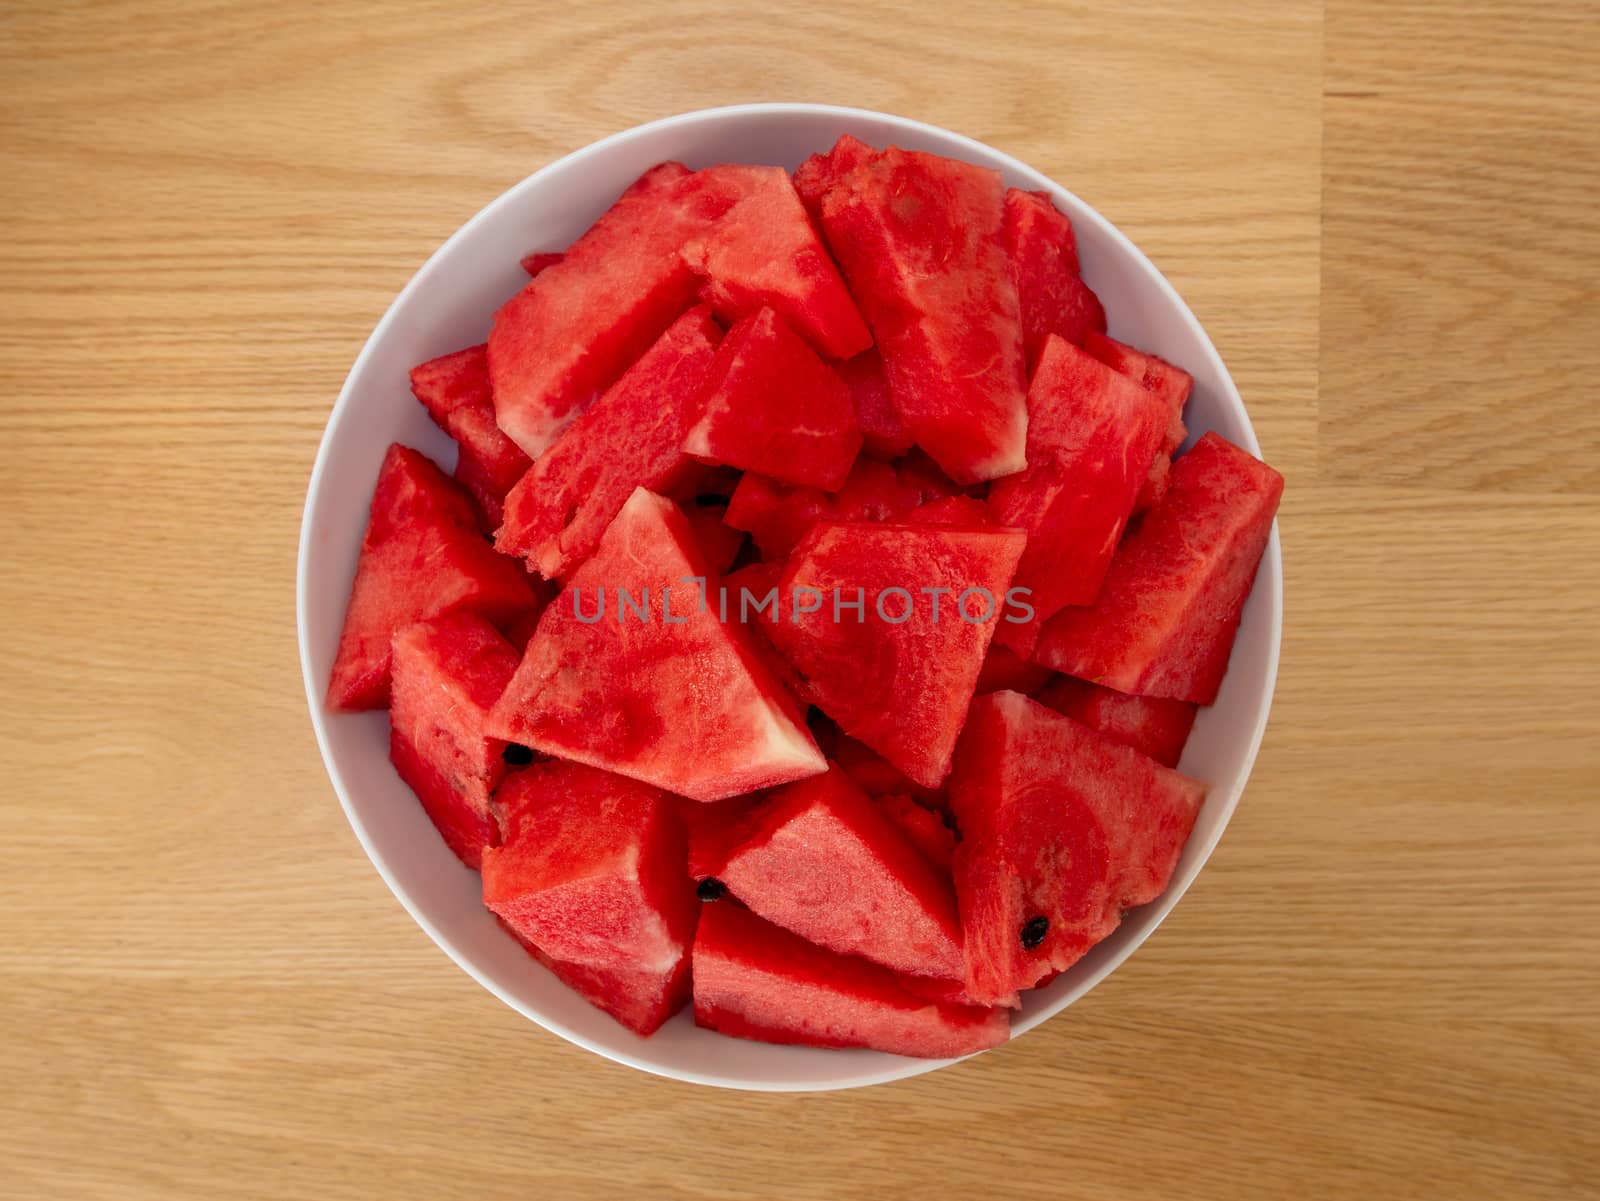 Cube slices of a ripe watermelon on a plate. Selective focus. by Amankris